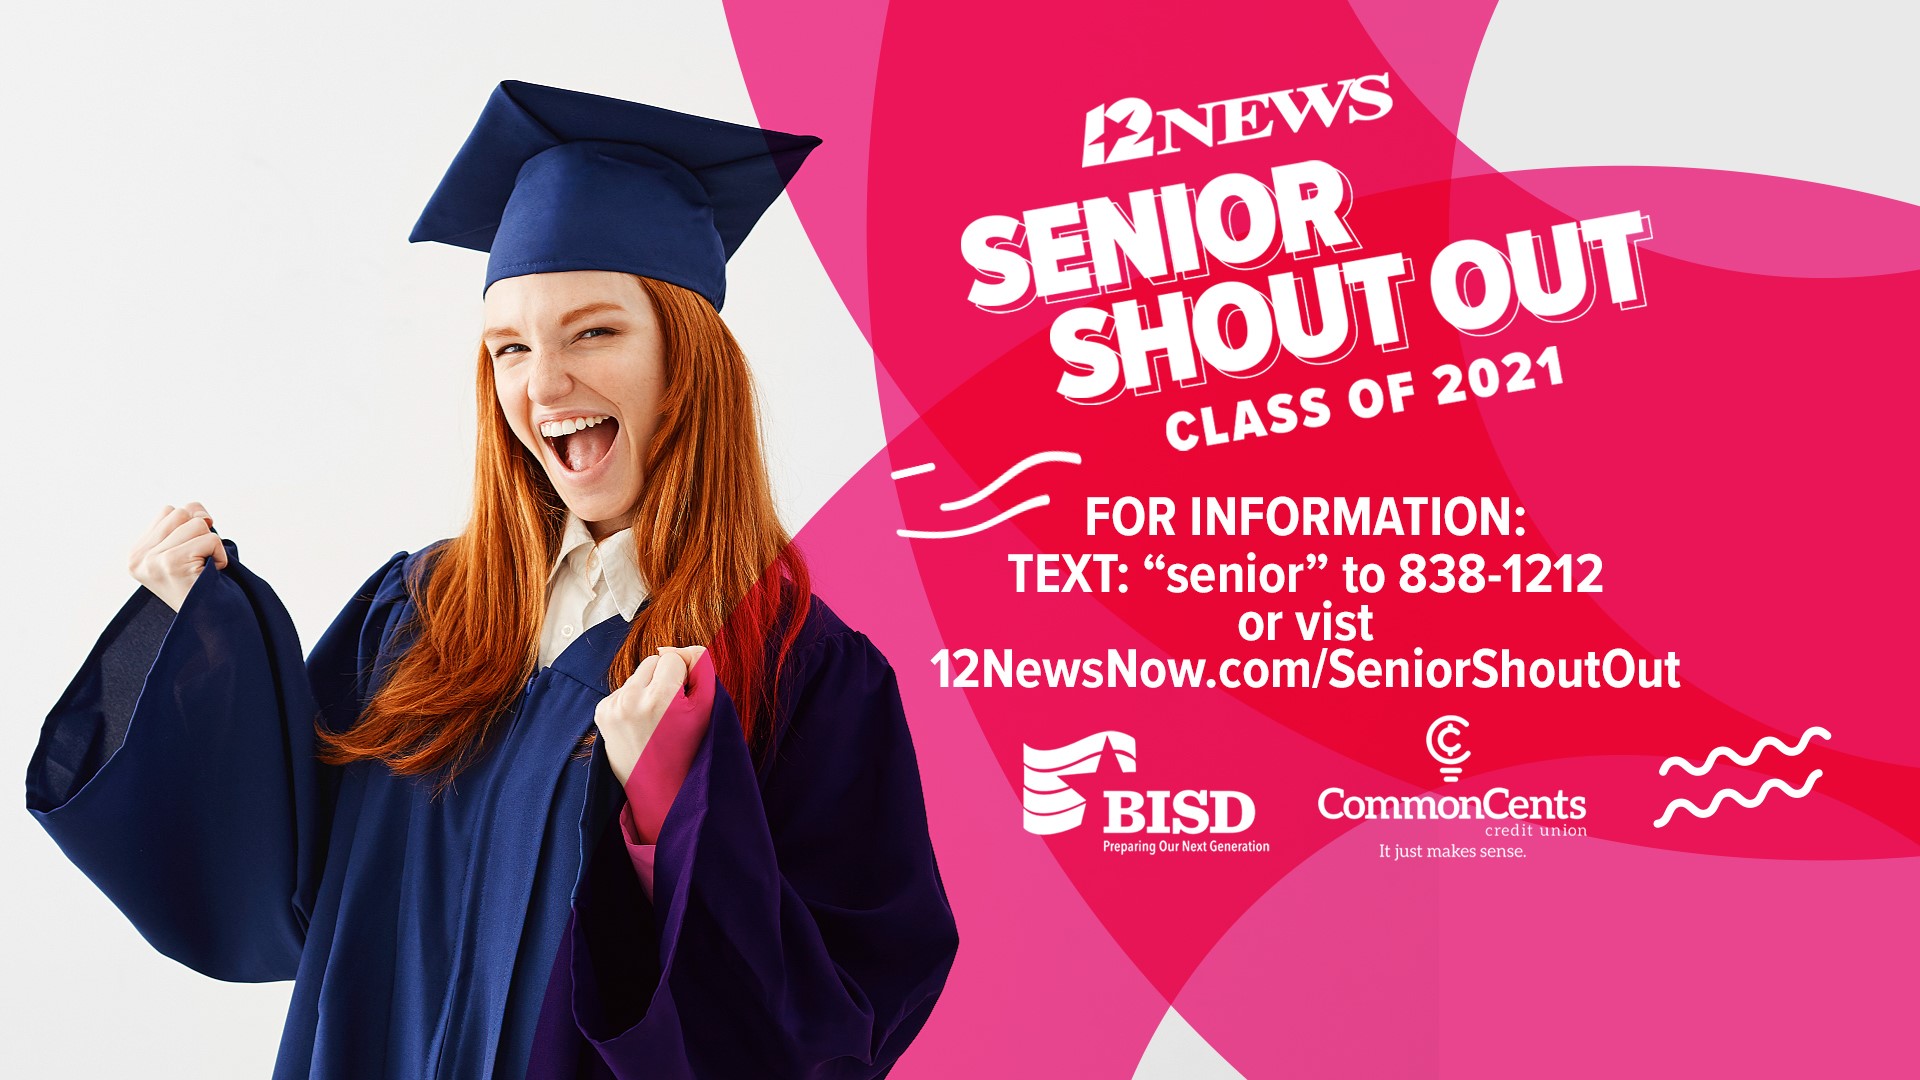 12News wants to make sure the Senior class of 2021 gets their shoutouts by accepting photos via the 12NewsNow App.